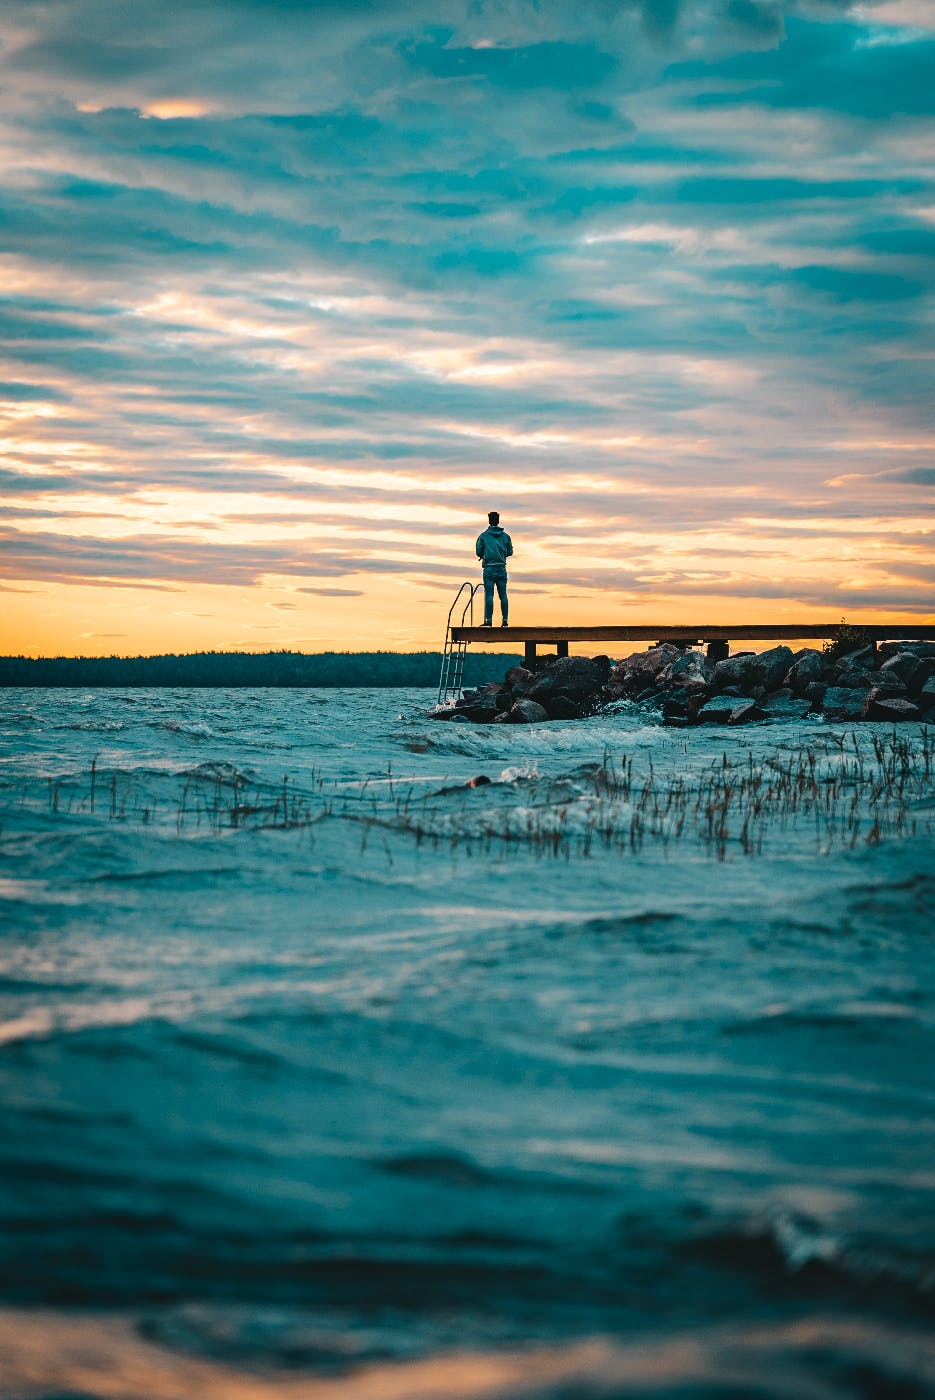 A man standing on a dock stretching out into a topaz blue ocean